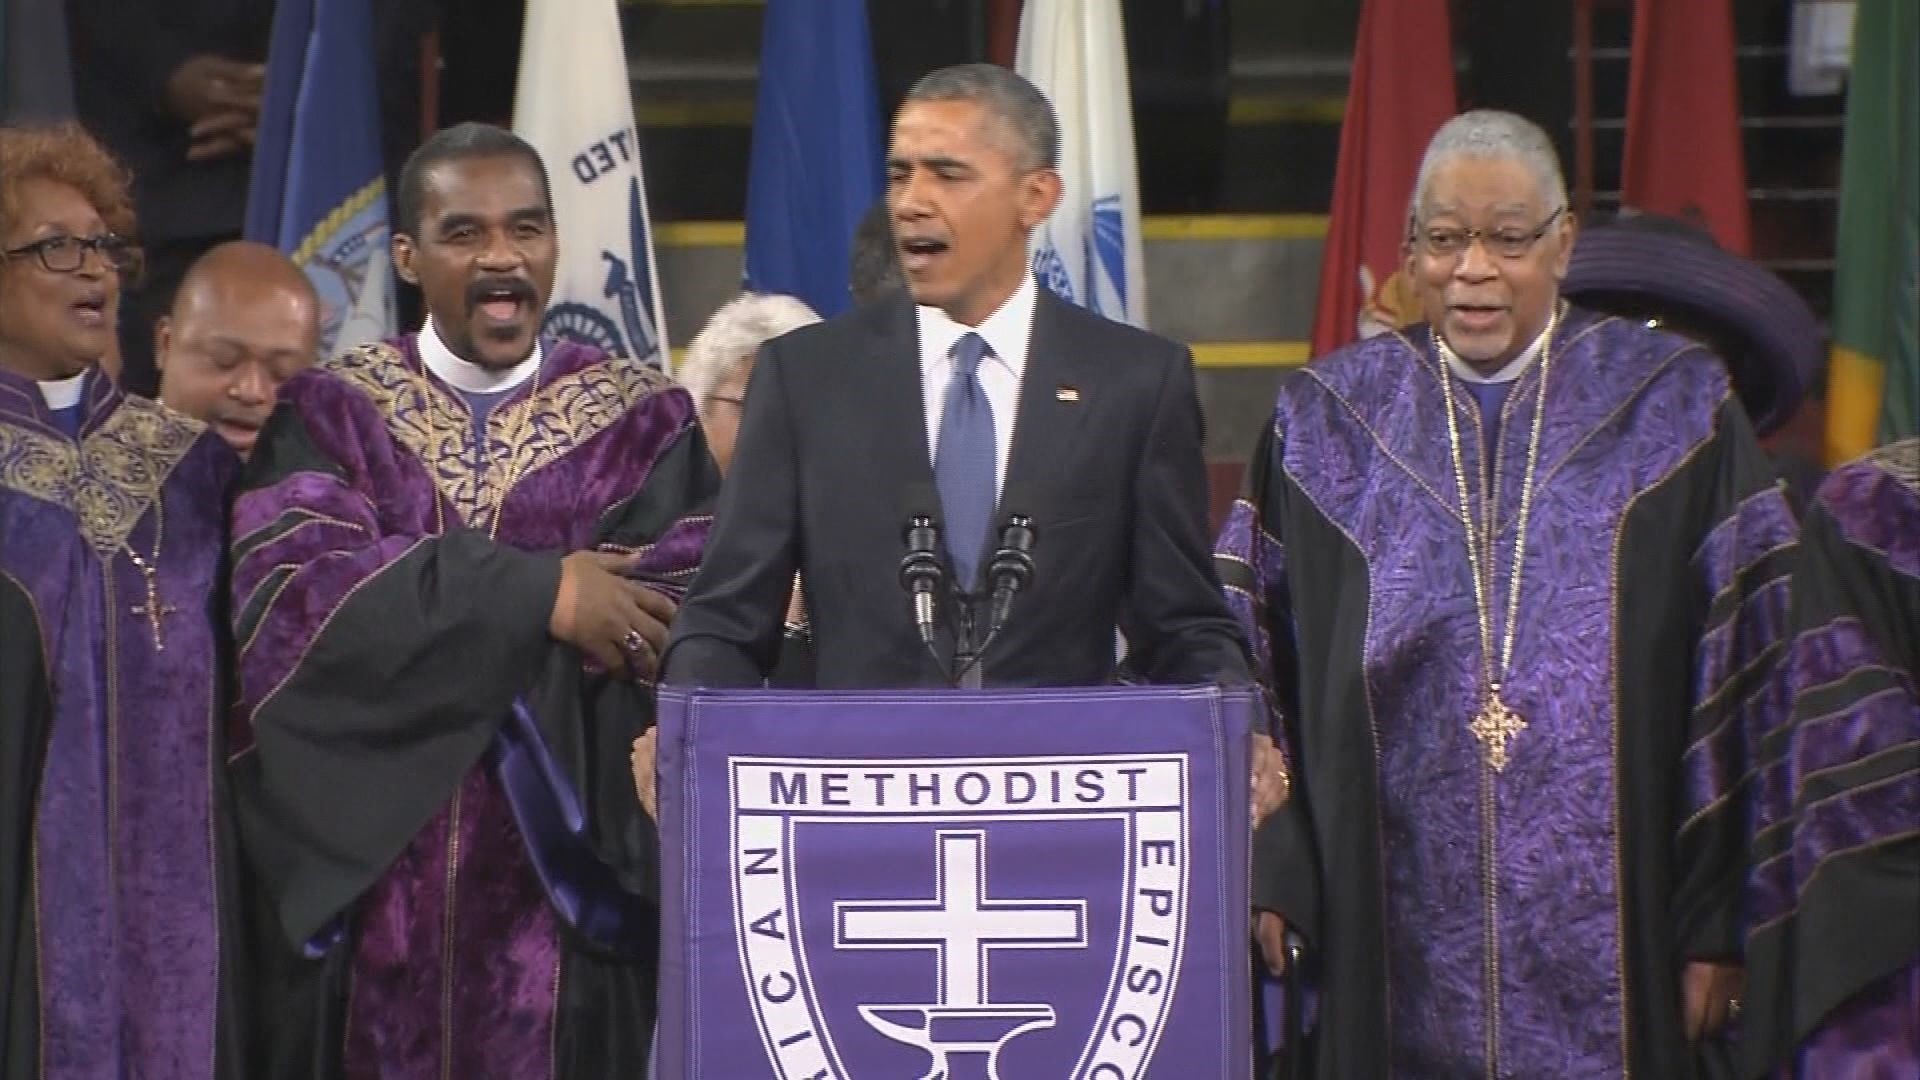 President Obama sang 'Amazing Grace' during the funeral of Clementa Pinckney in June of 2015. Pinckney was the pastor of Mother Emanuel AME Church in Charleston, SC, and was one of 9 people killed in a massacre at the church.